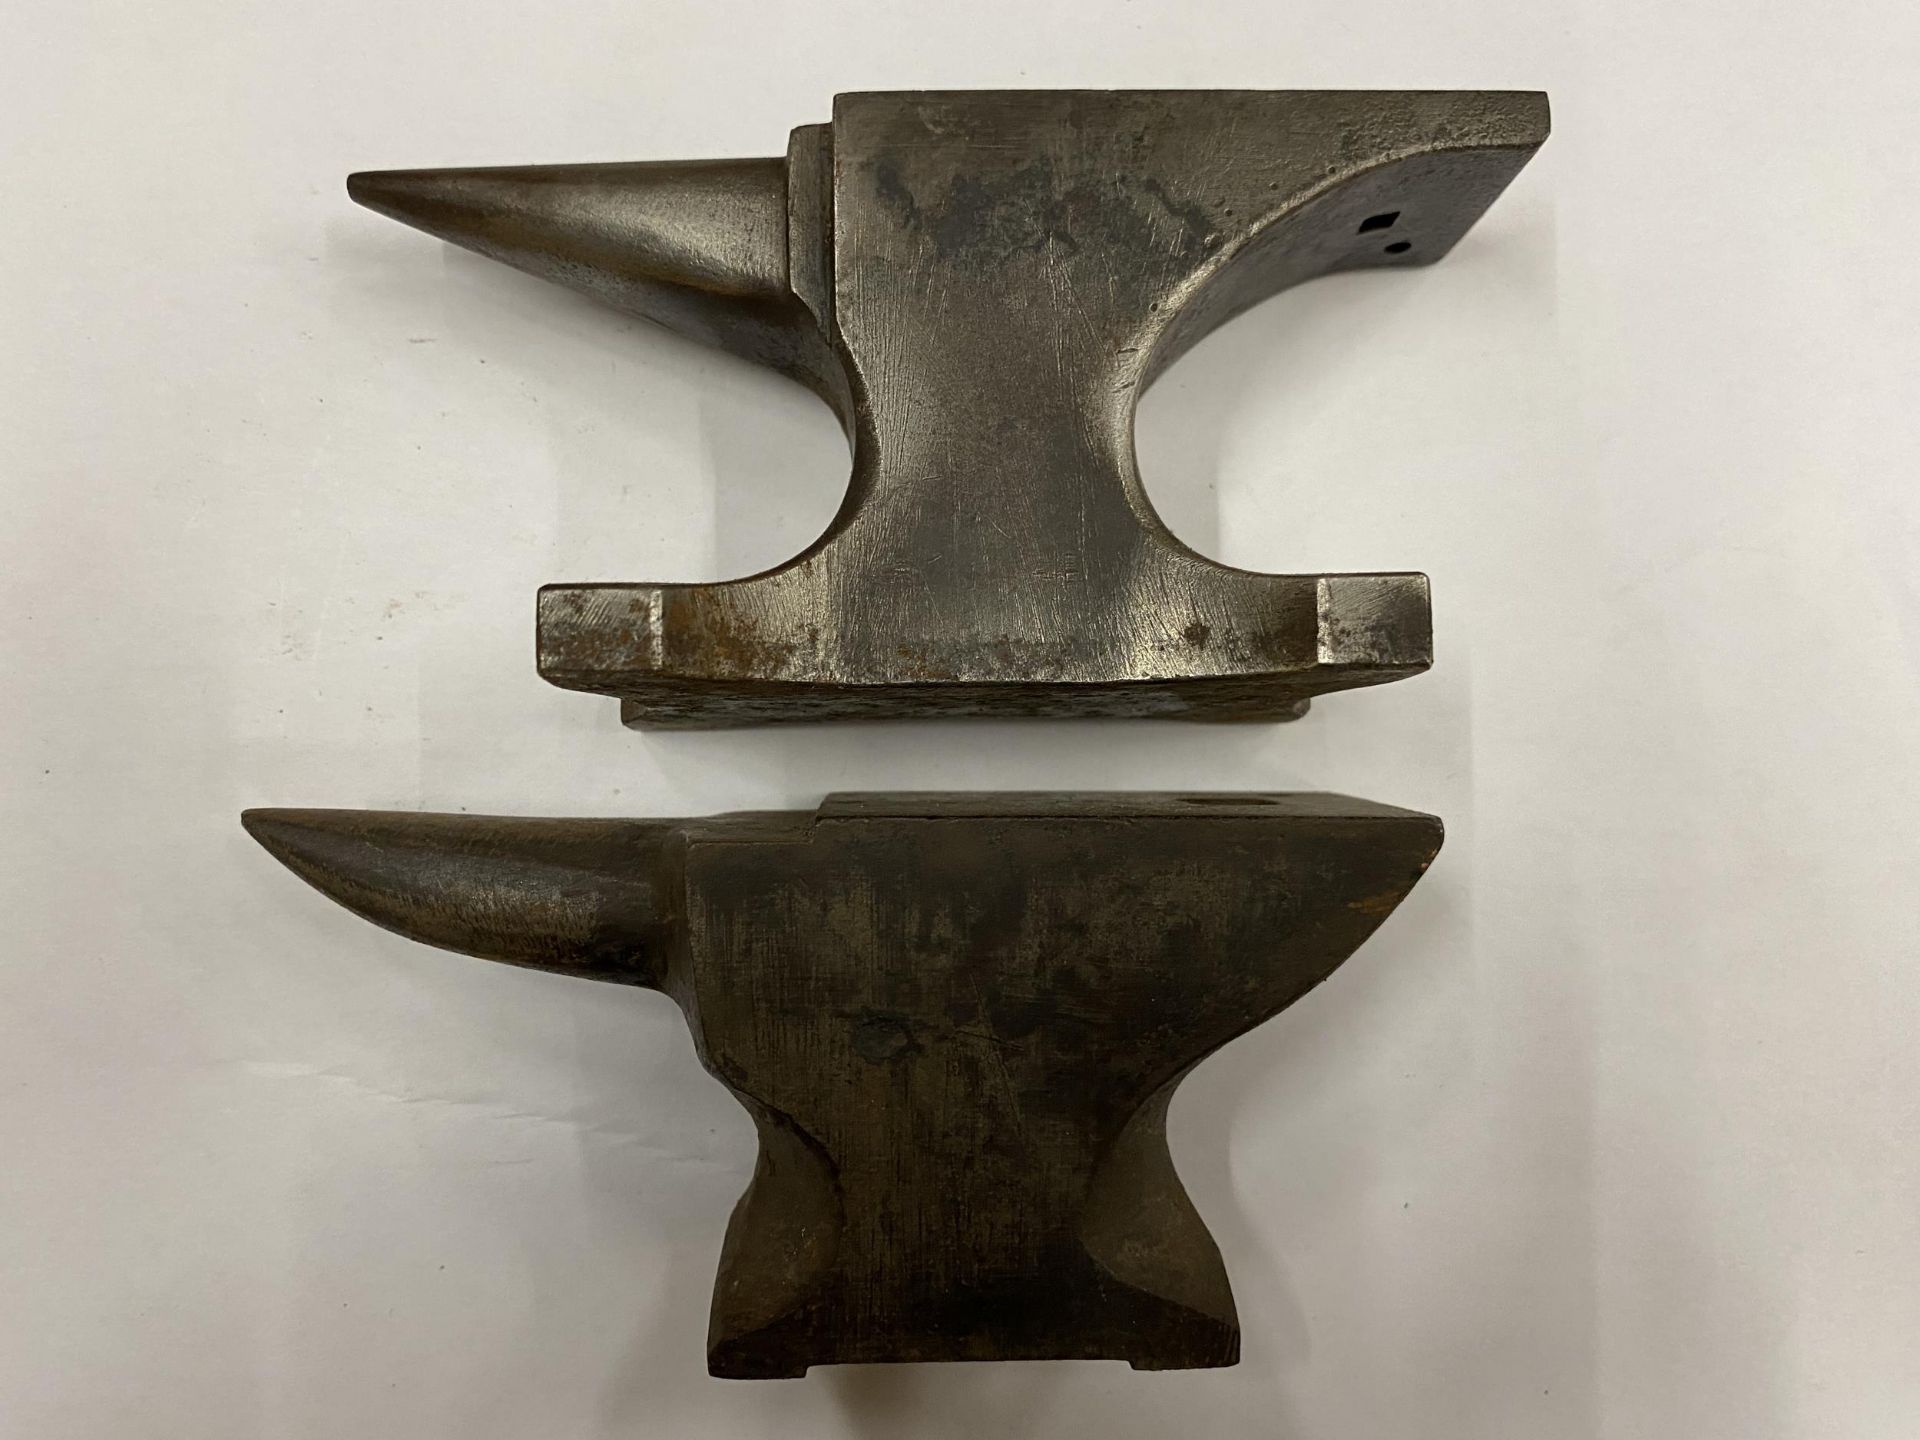 TWO MINIATURE HEAVY SAMPLE ANVILS